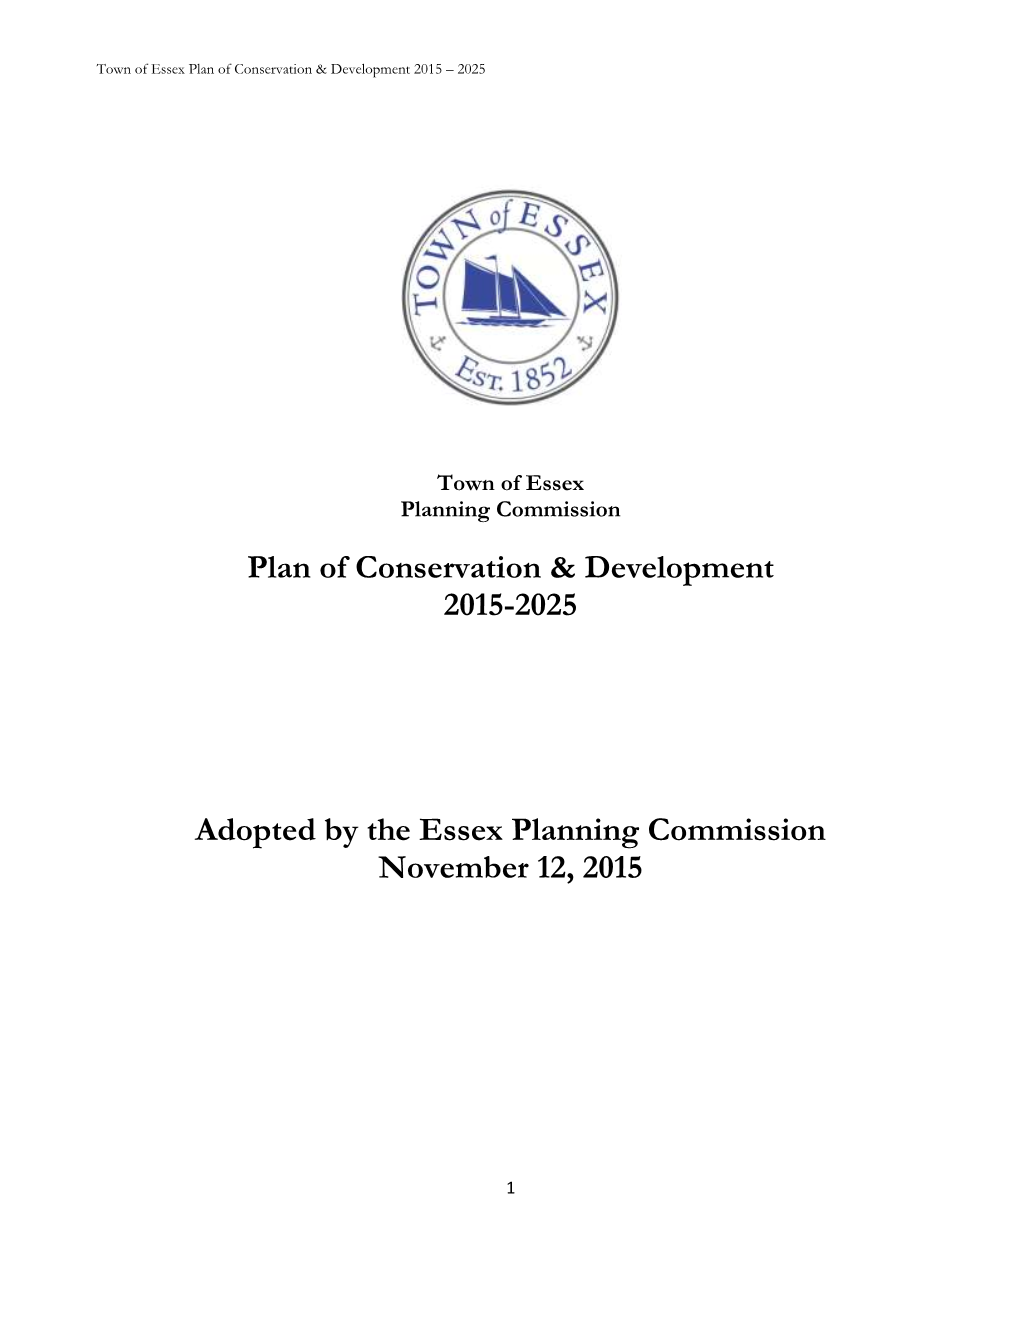 Plan of Conservation and Development 2015